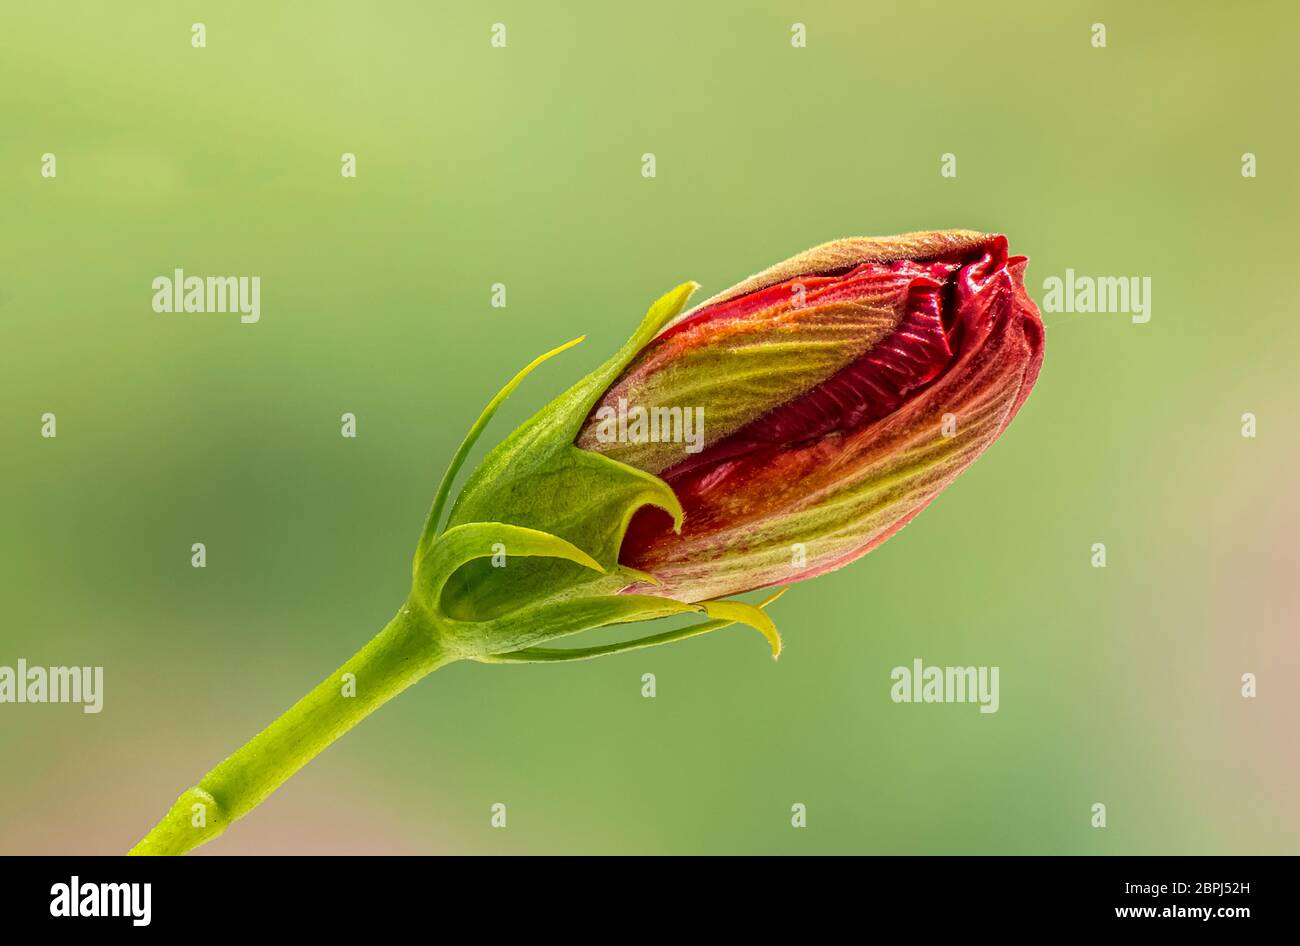 Closeup of single red Hibiscus flower bud against a green background Stock Photo